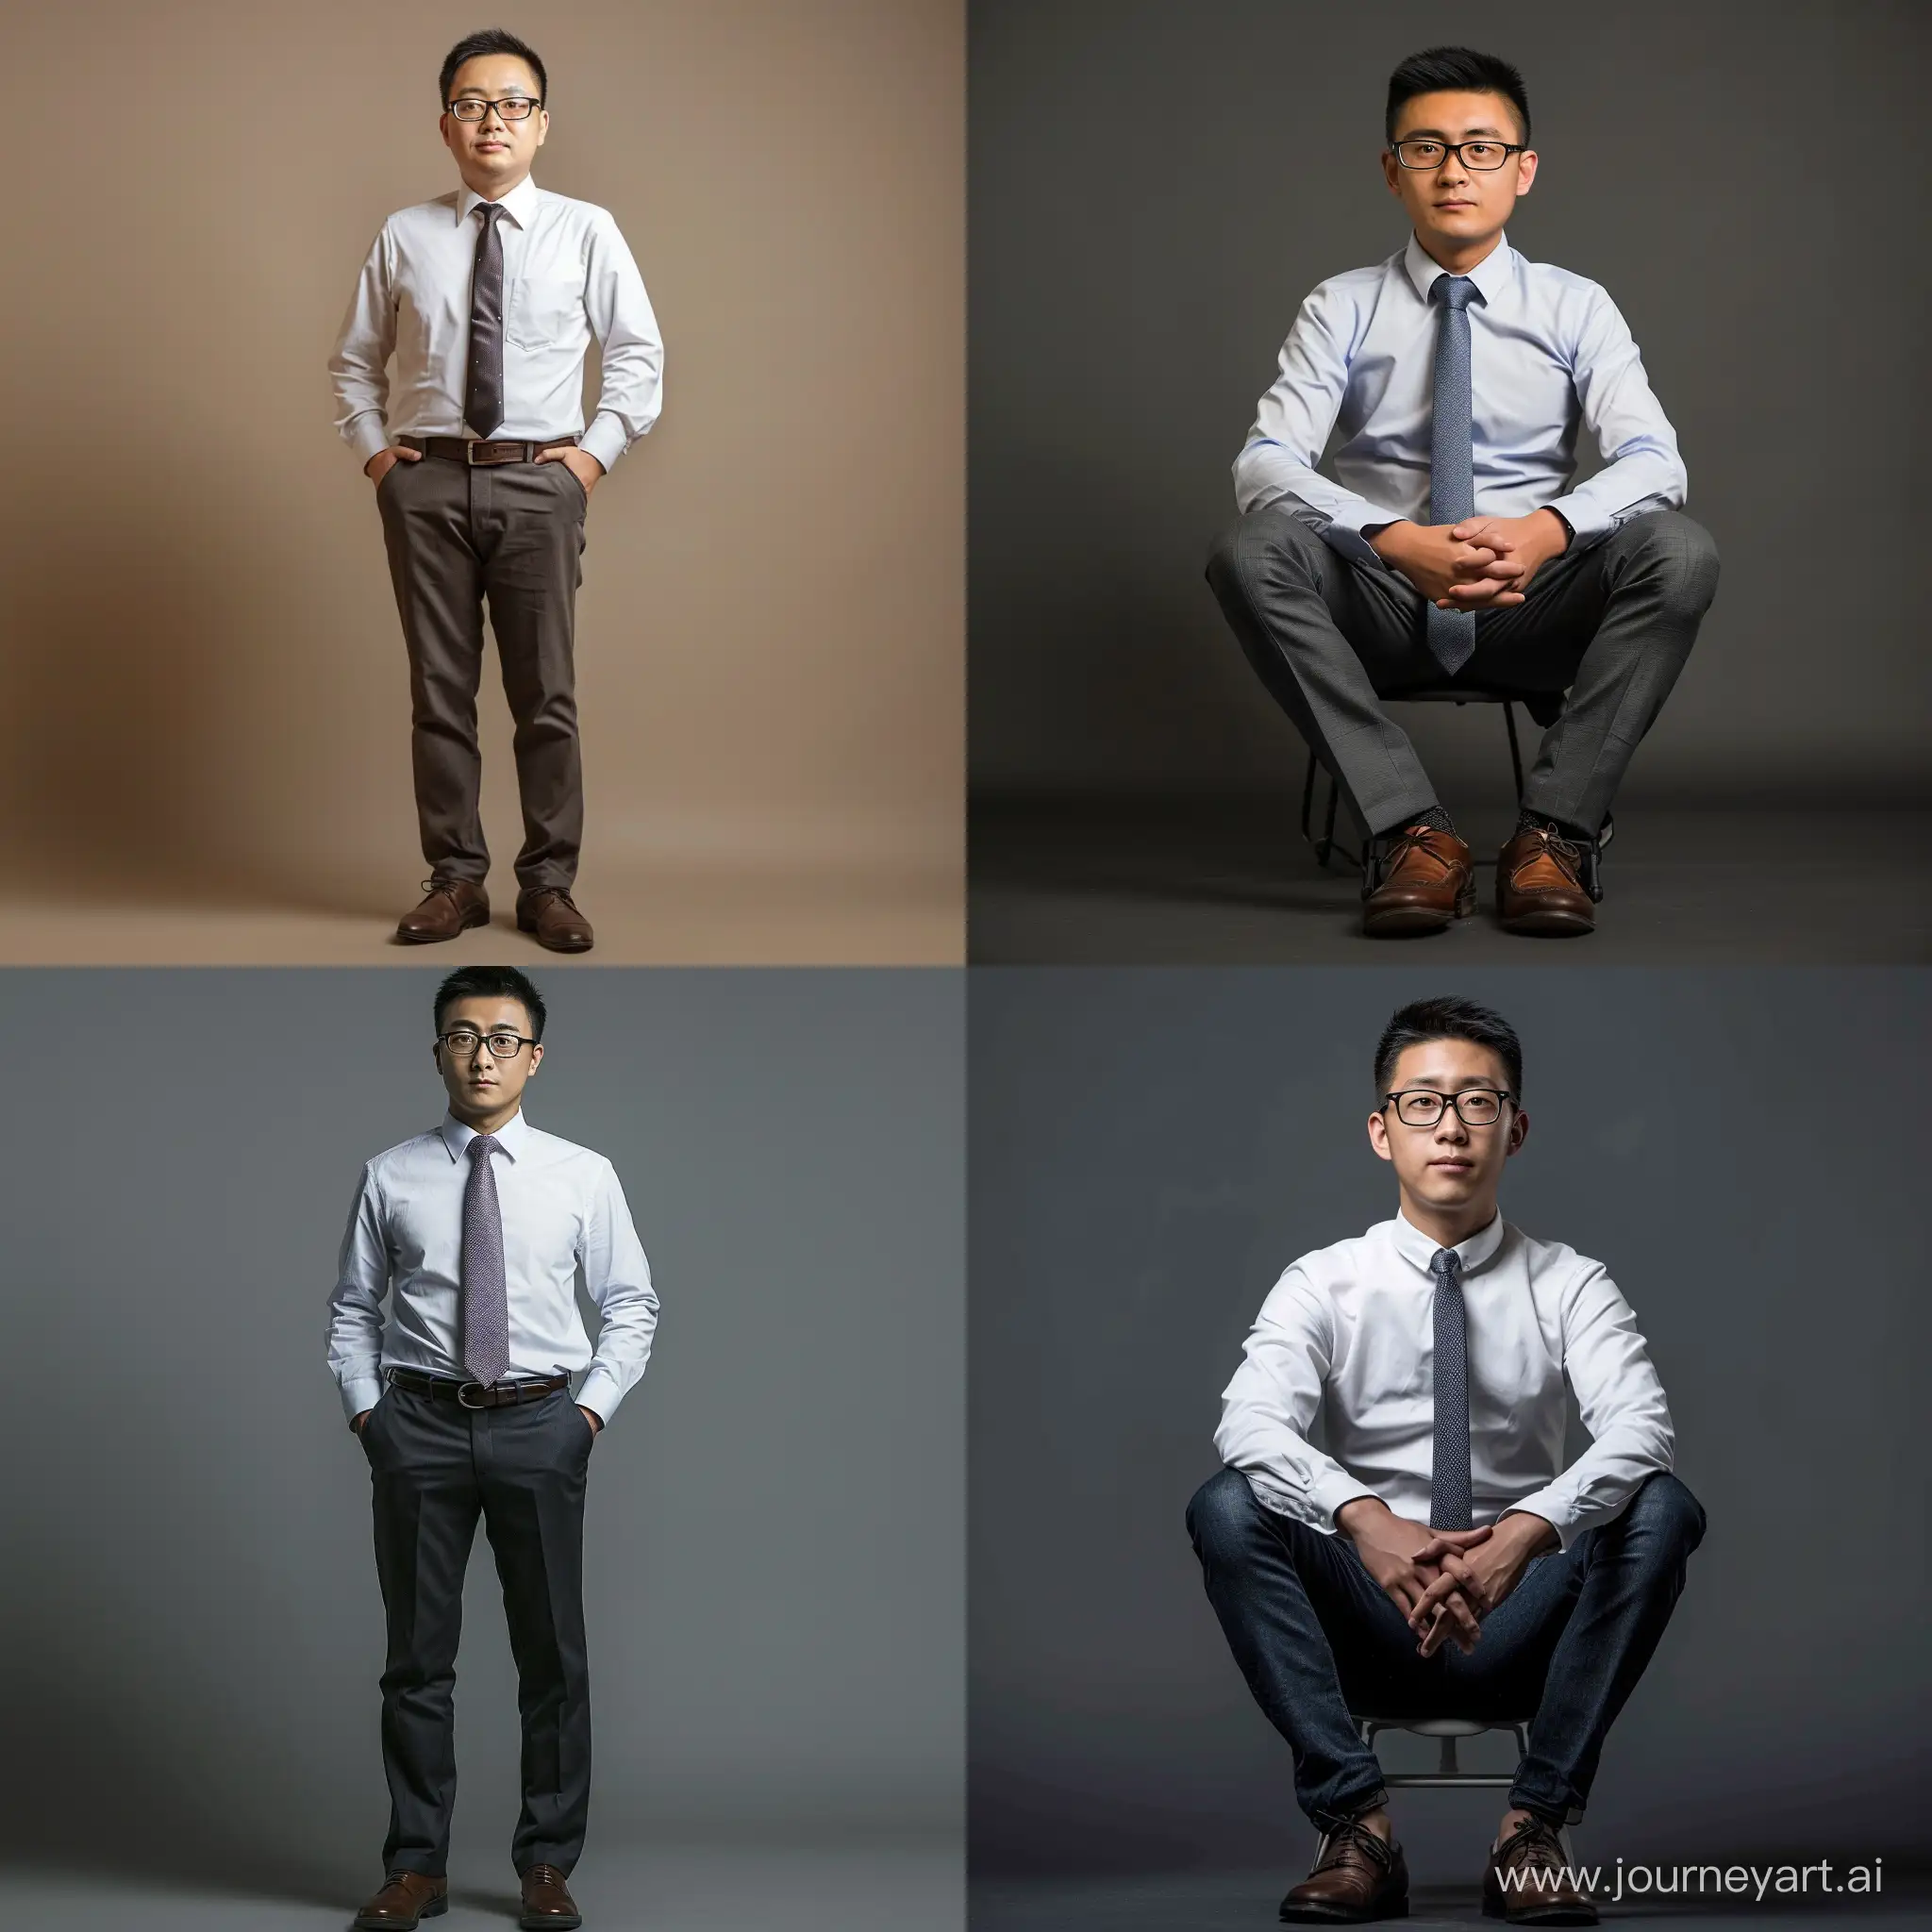 Sophisticated-Chinese-WhiteCollar-Professional-in-Formal-Wear